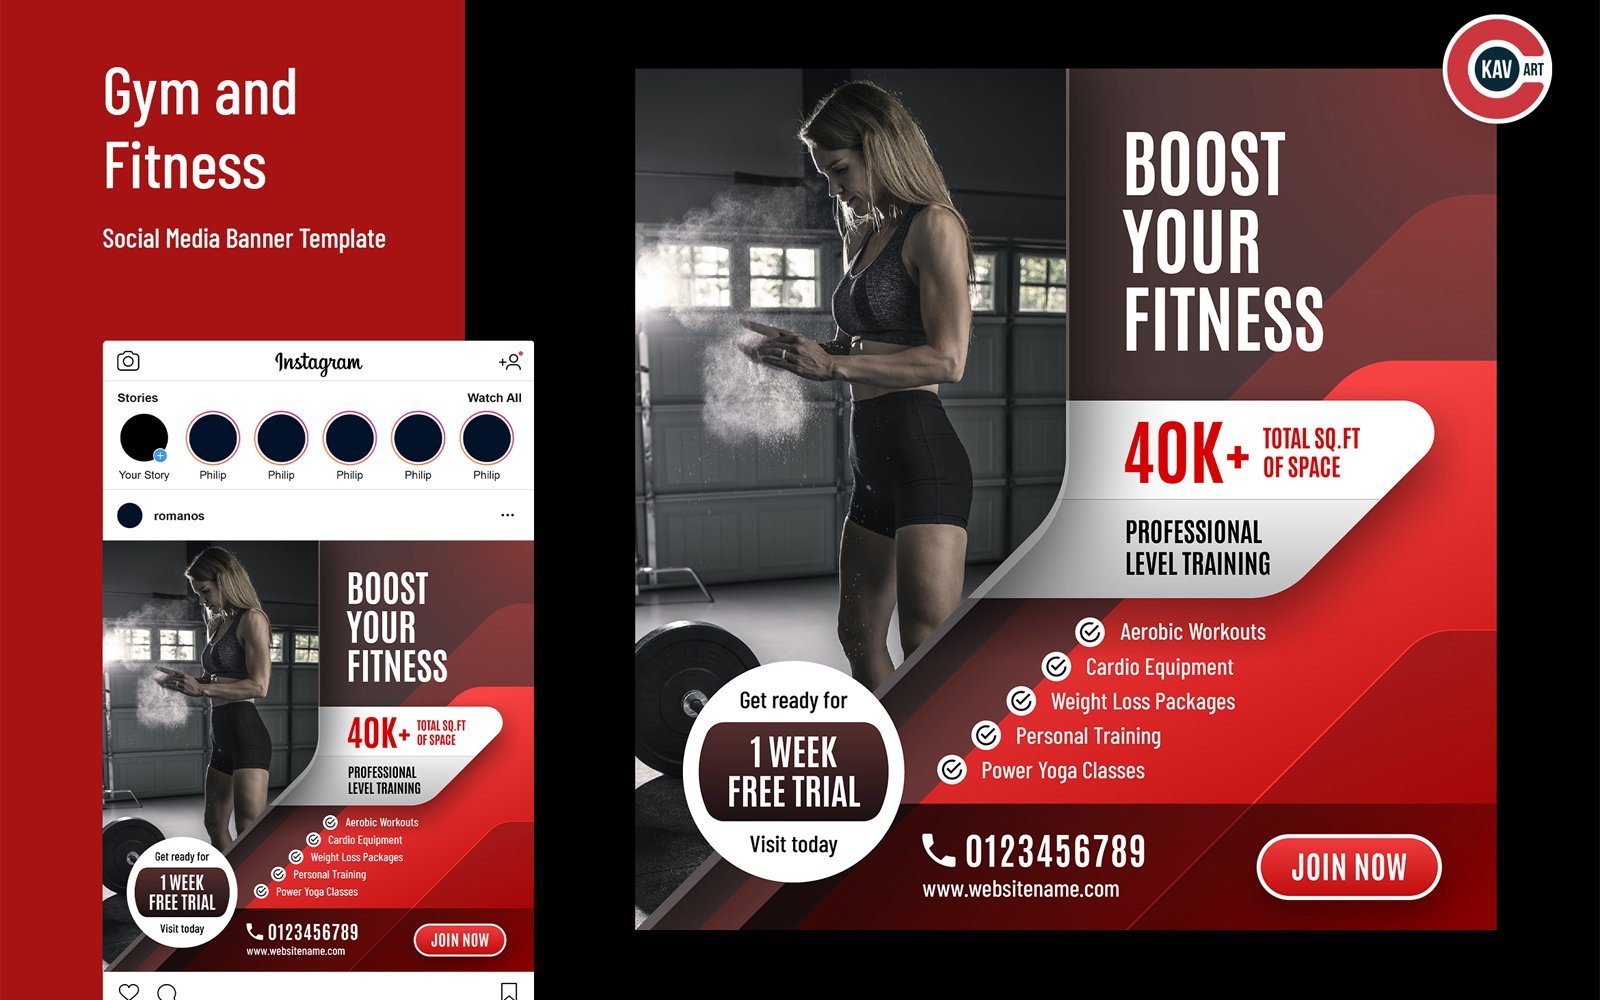 Gym and Fitness Social Media Banner Template - 00282